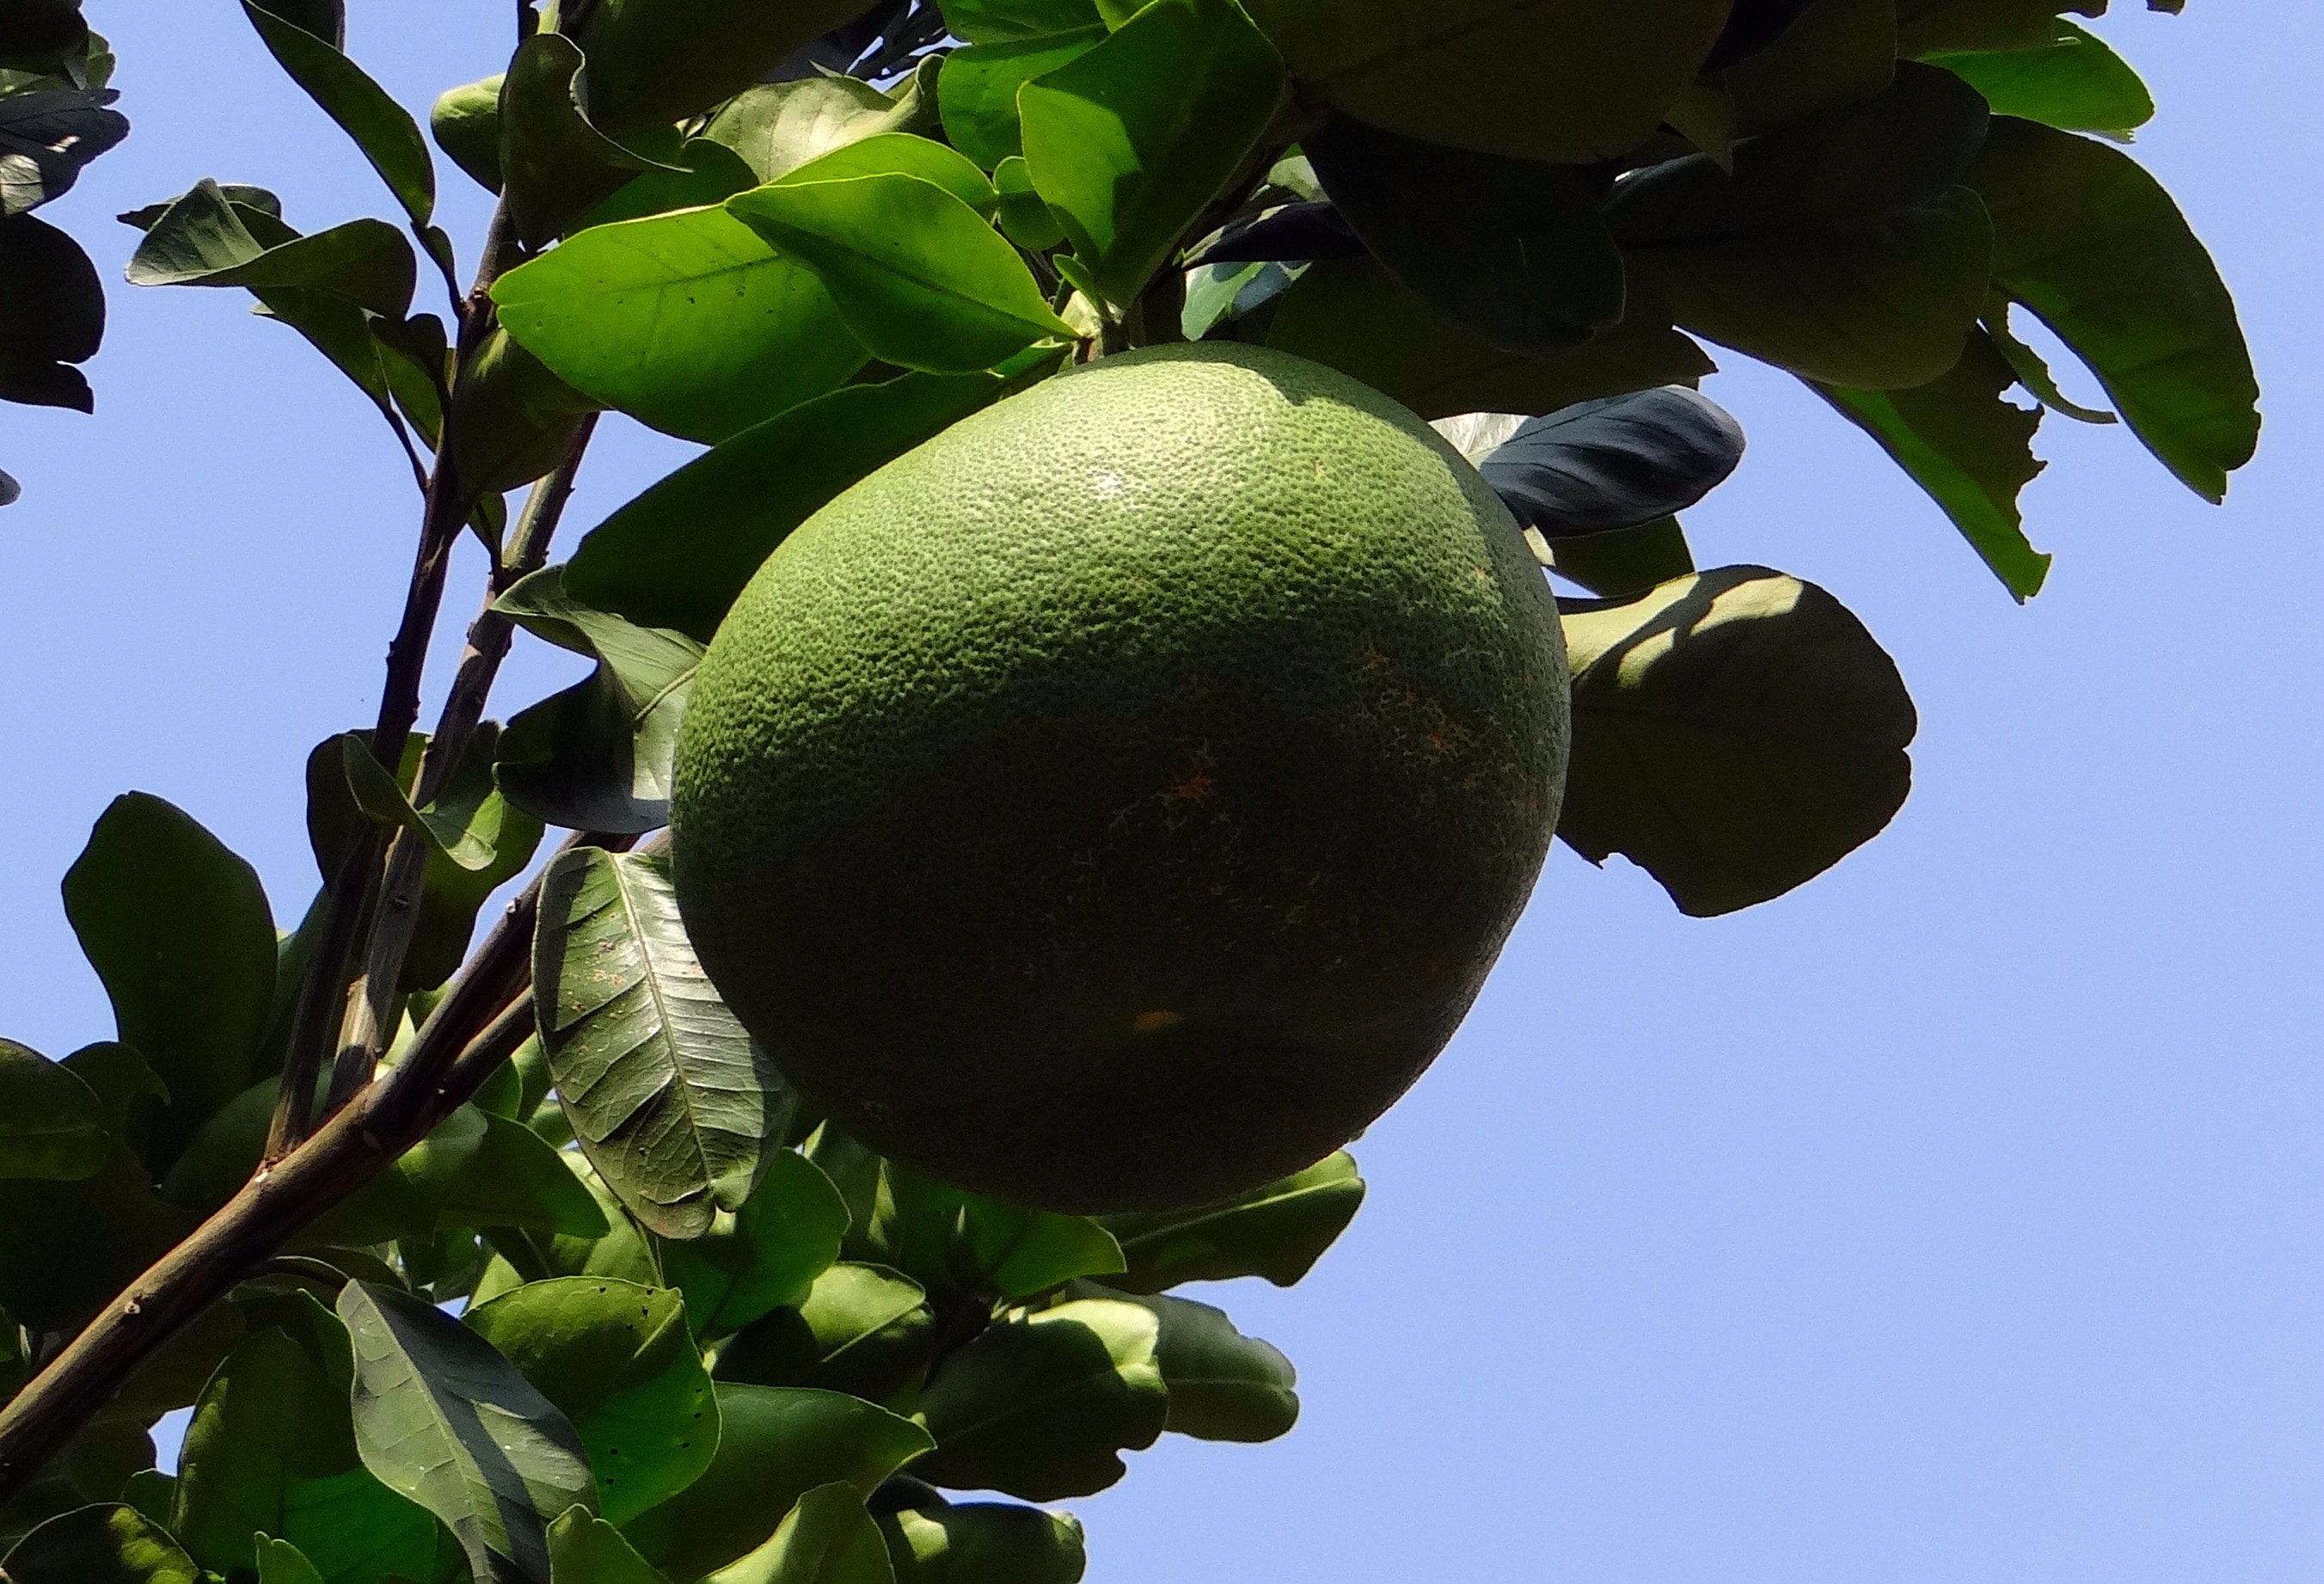 small green fruit in tree under the blue sky during daytime